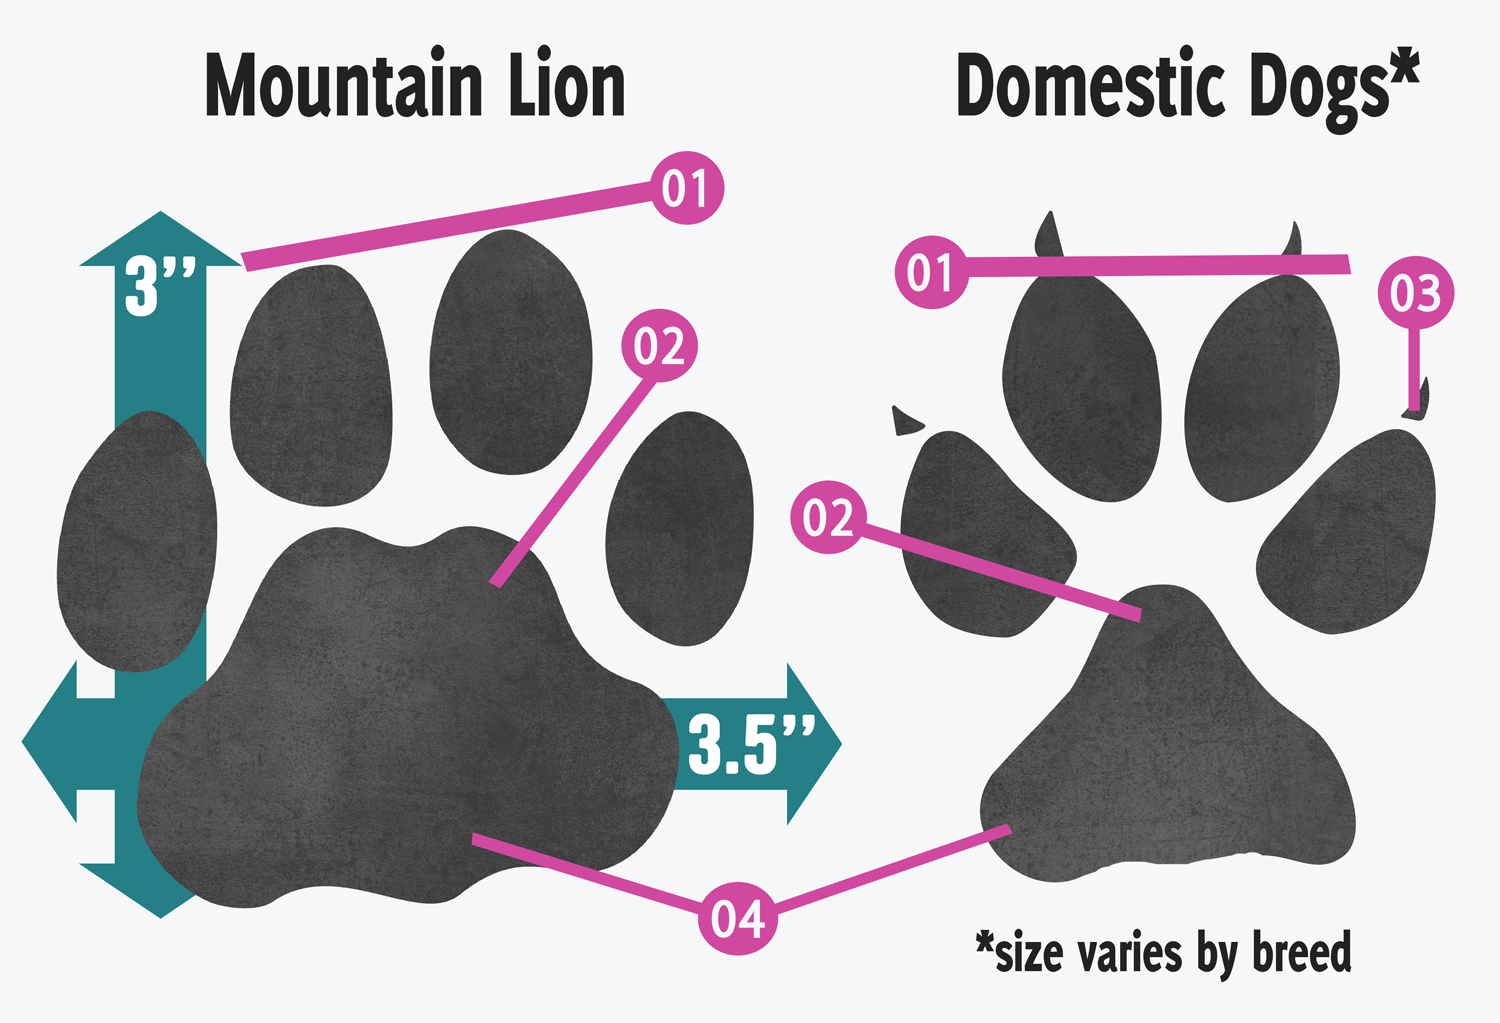  Infographic showing a mountain lion's track against a dog's track